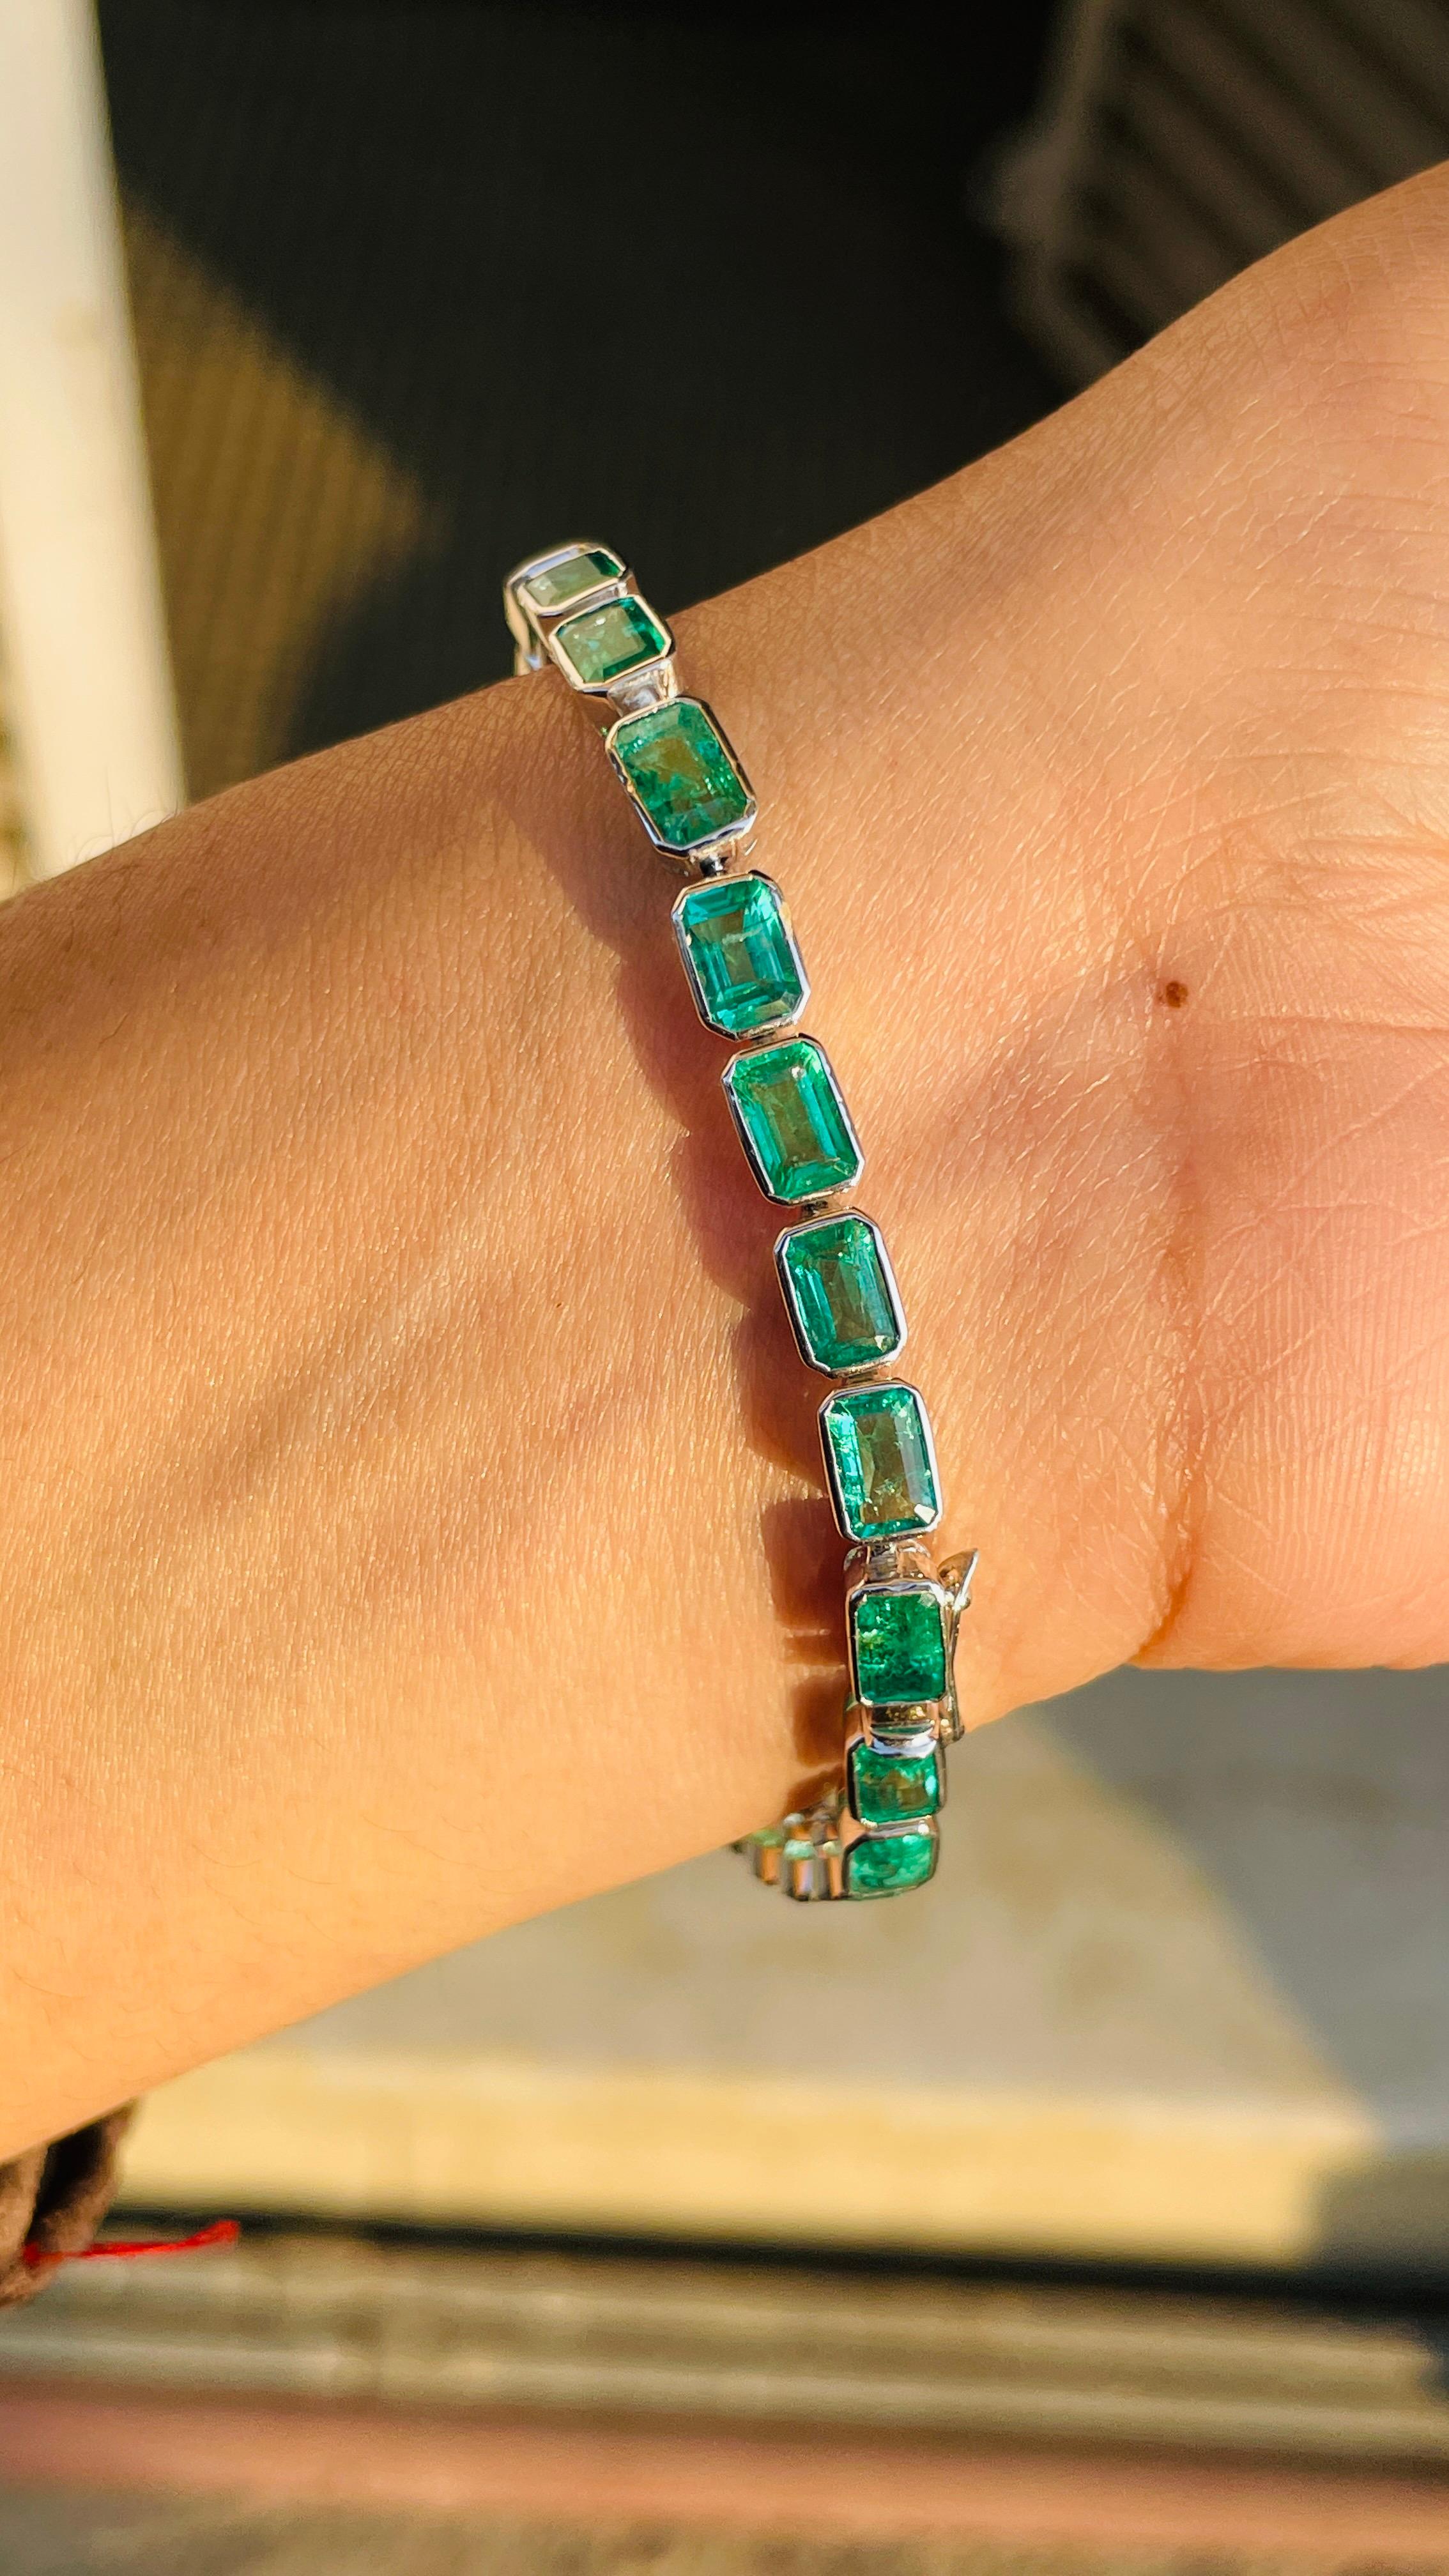 Emerald bracelet in 18K Gold. It has a perfect octagon cut gemstone to make you stand out on any occasion or an event.
A tennis bracelet is an essential piece of jewelry when it comes to your wedding day. The sleek and elegant style complements the